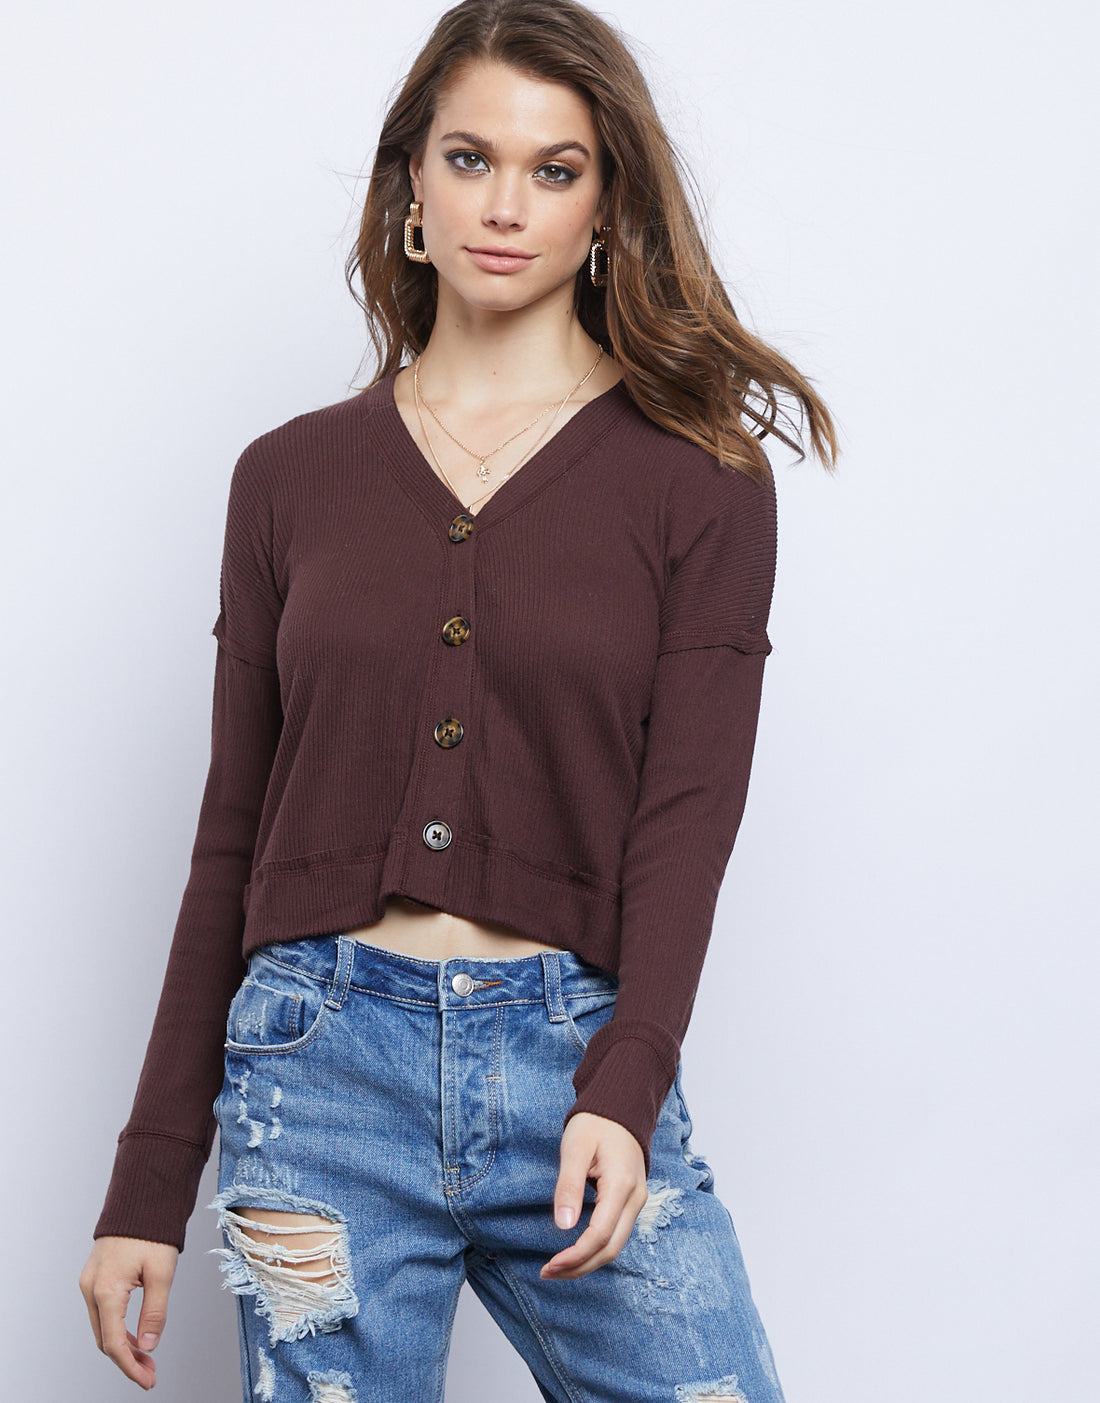 Dixie Lightweight Cardigan Top Tops Dark Brown Small -2020AVE